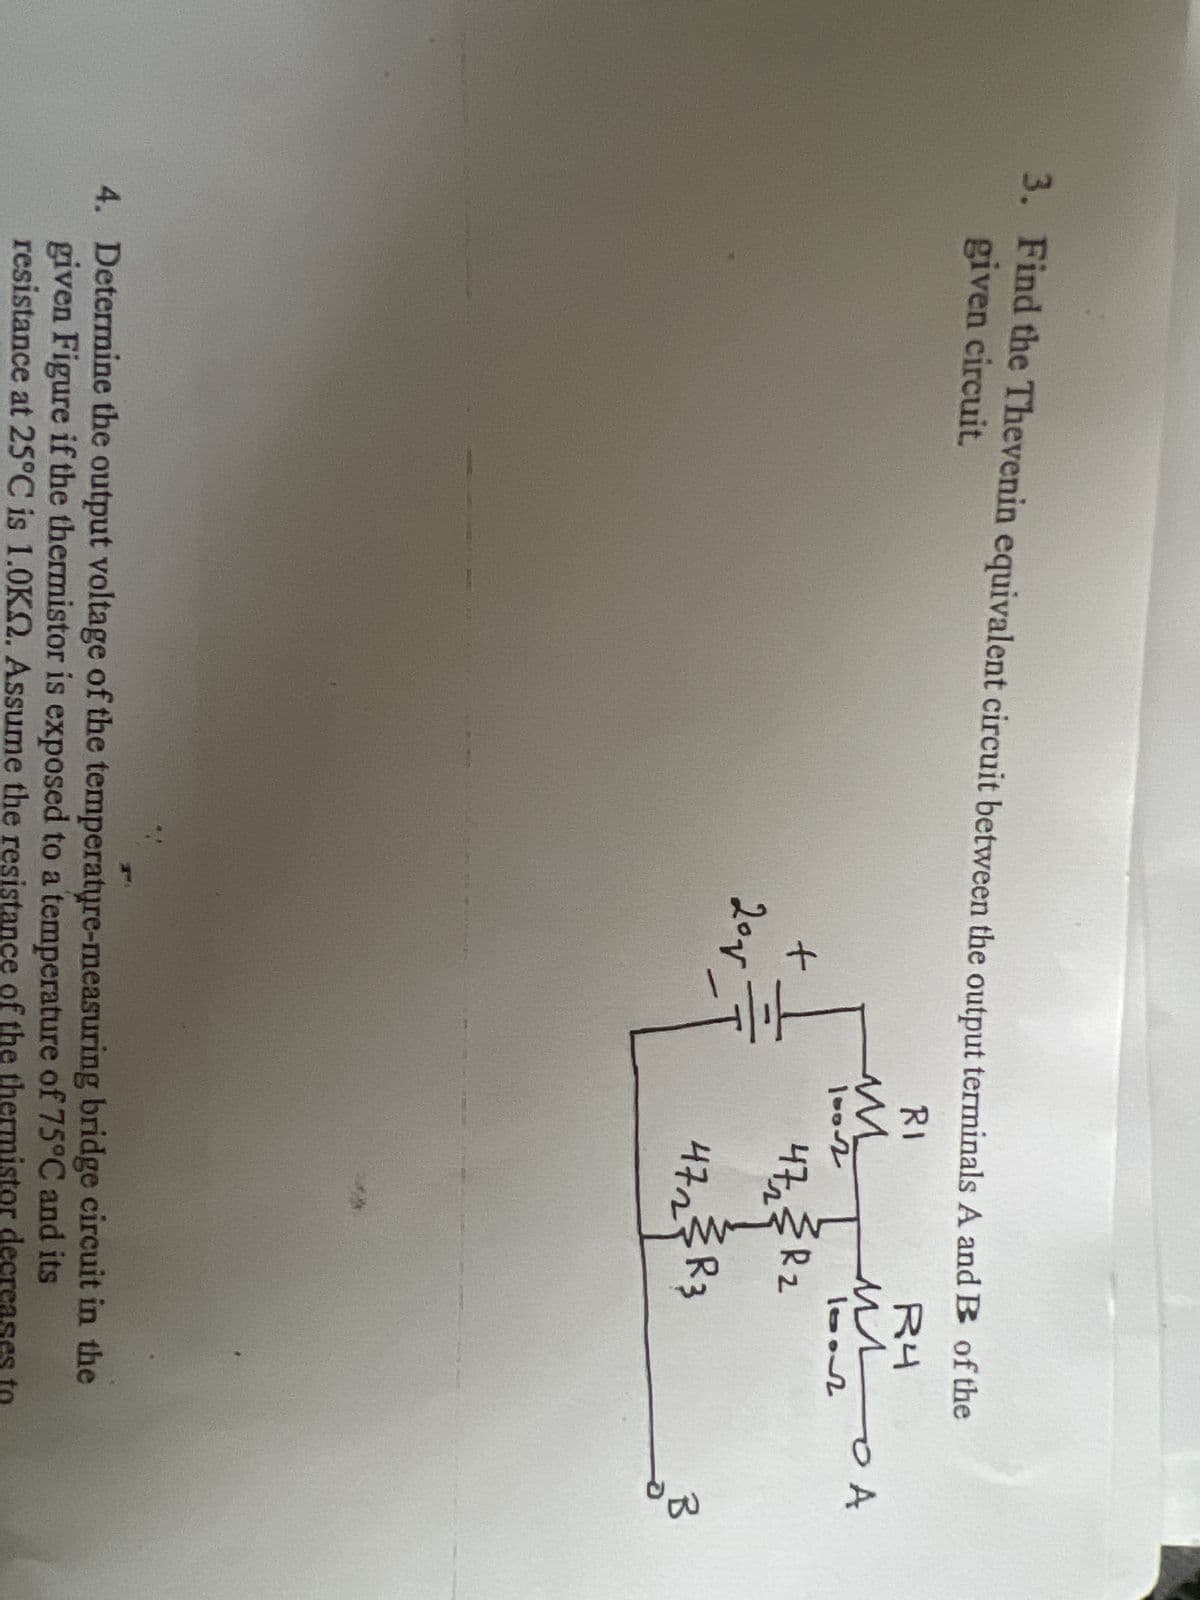 3. Find the Thevenin equivalent circuit between the output terminals A and B of the
given circuit.
RI
R4
MA
10012
+
201
M
1002
47₂2 R₂
472₂2²33R3
니구
4. Determine the output voltage of the temperature-measuring bridge circuit in the
given Figure if the thermistor is exposed to a temperature of 75°C and its
resistance at 25°C is 1.0KQ. Assume the resistance of the thermistor decreases to
B